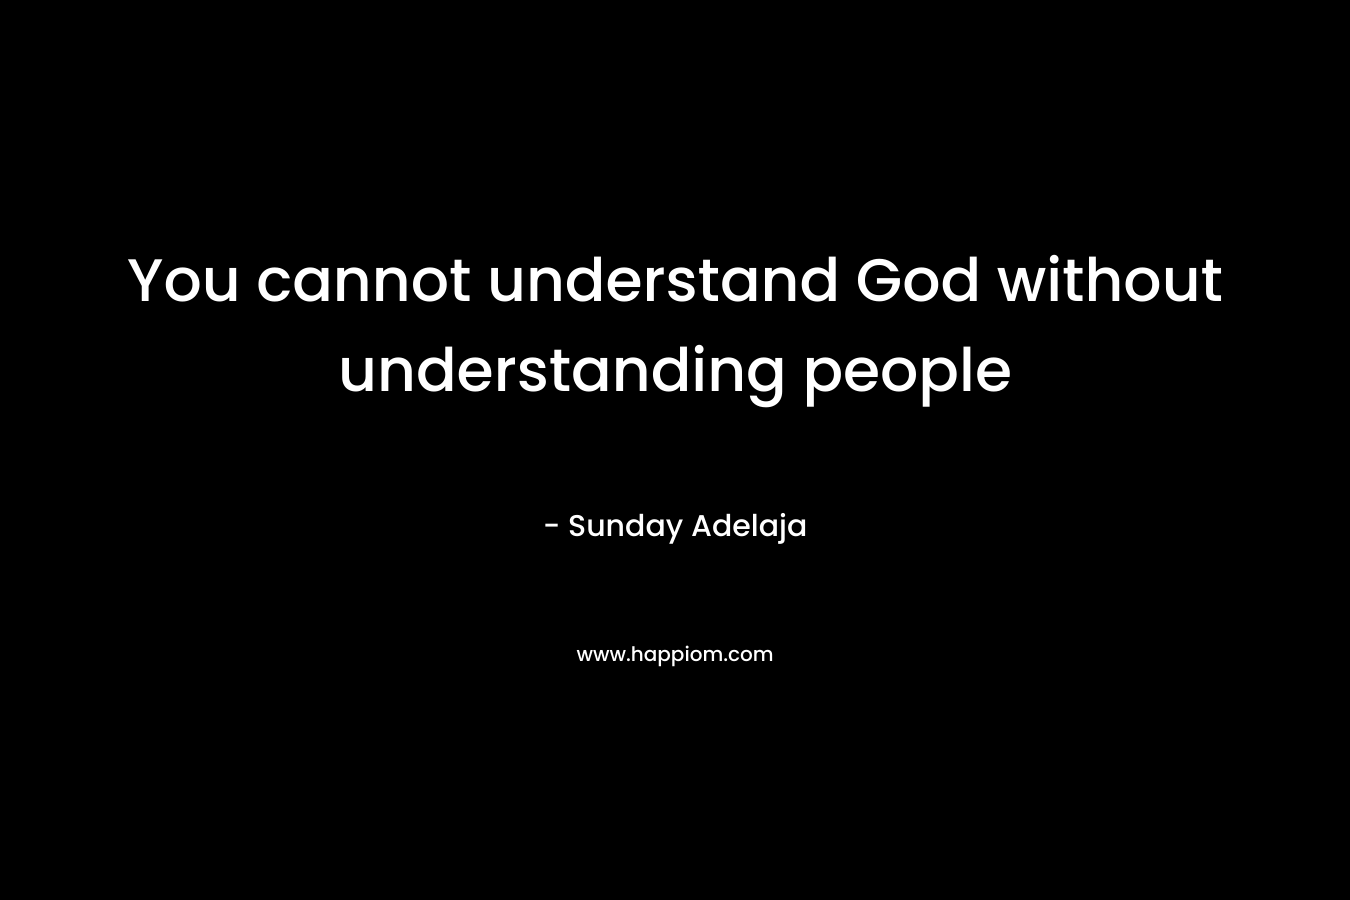 You cannot understand God without understanding people